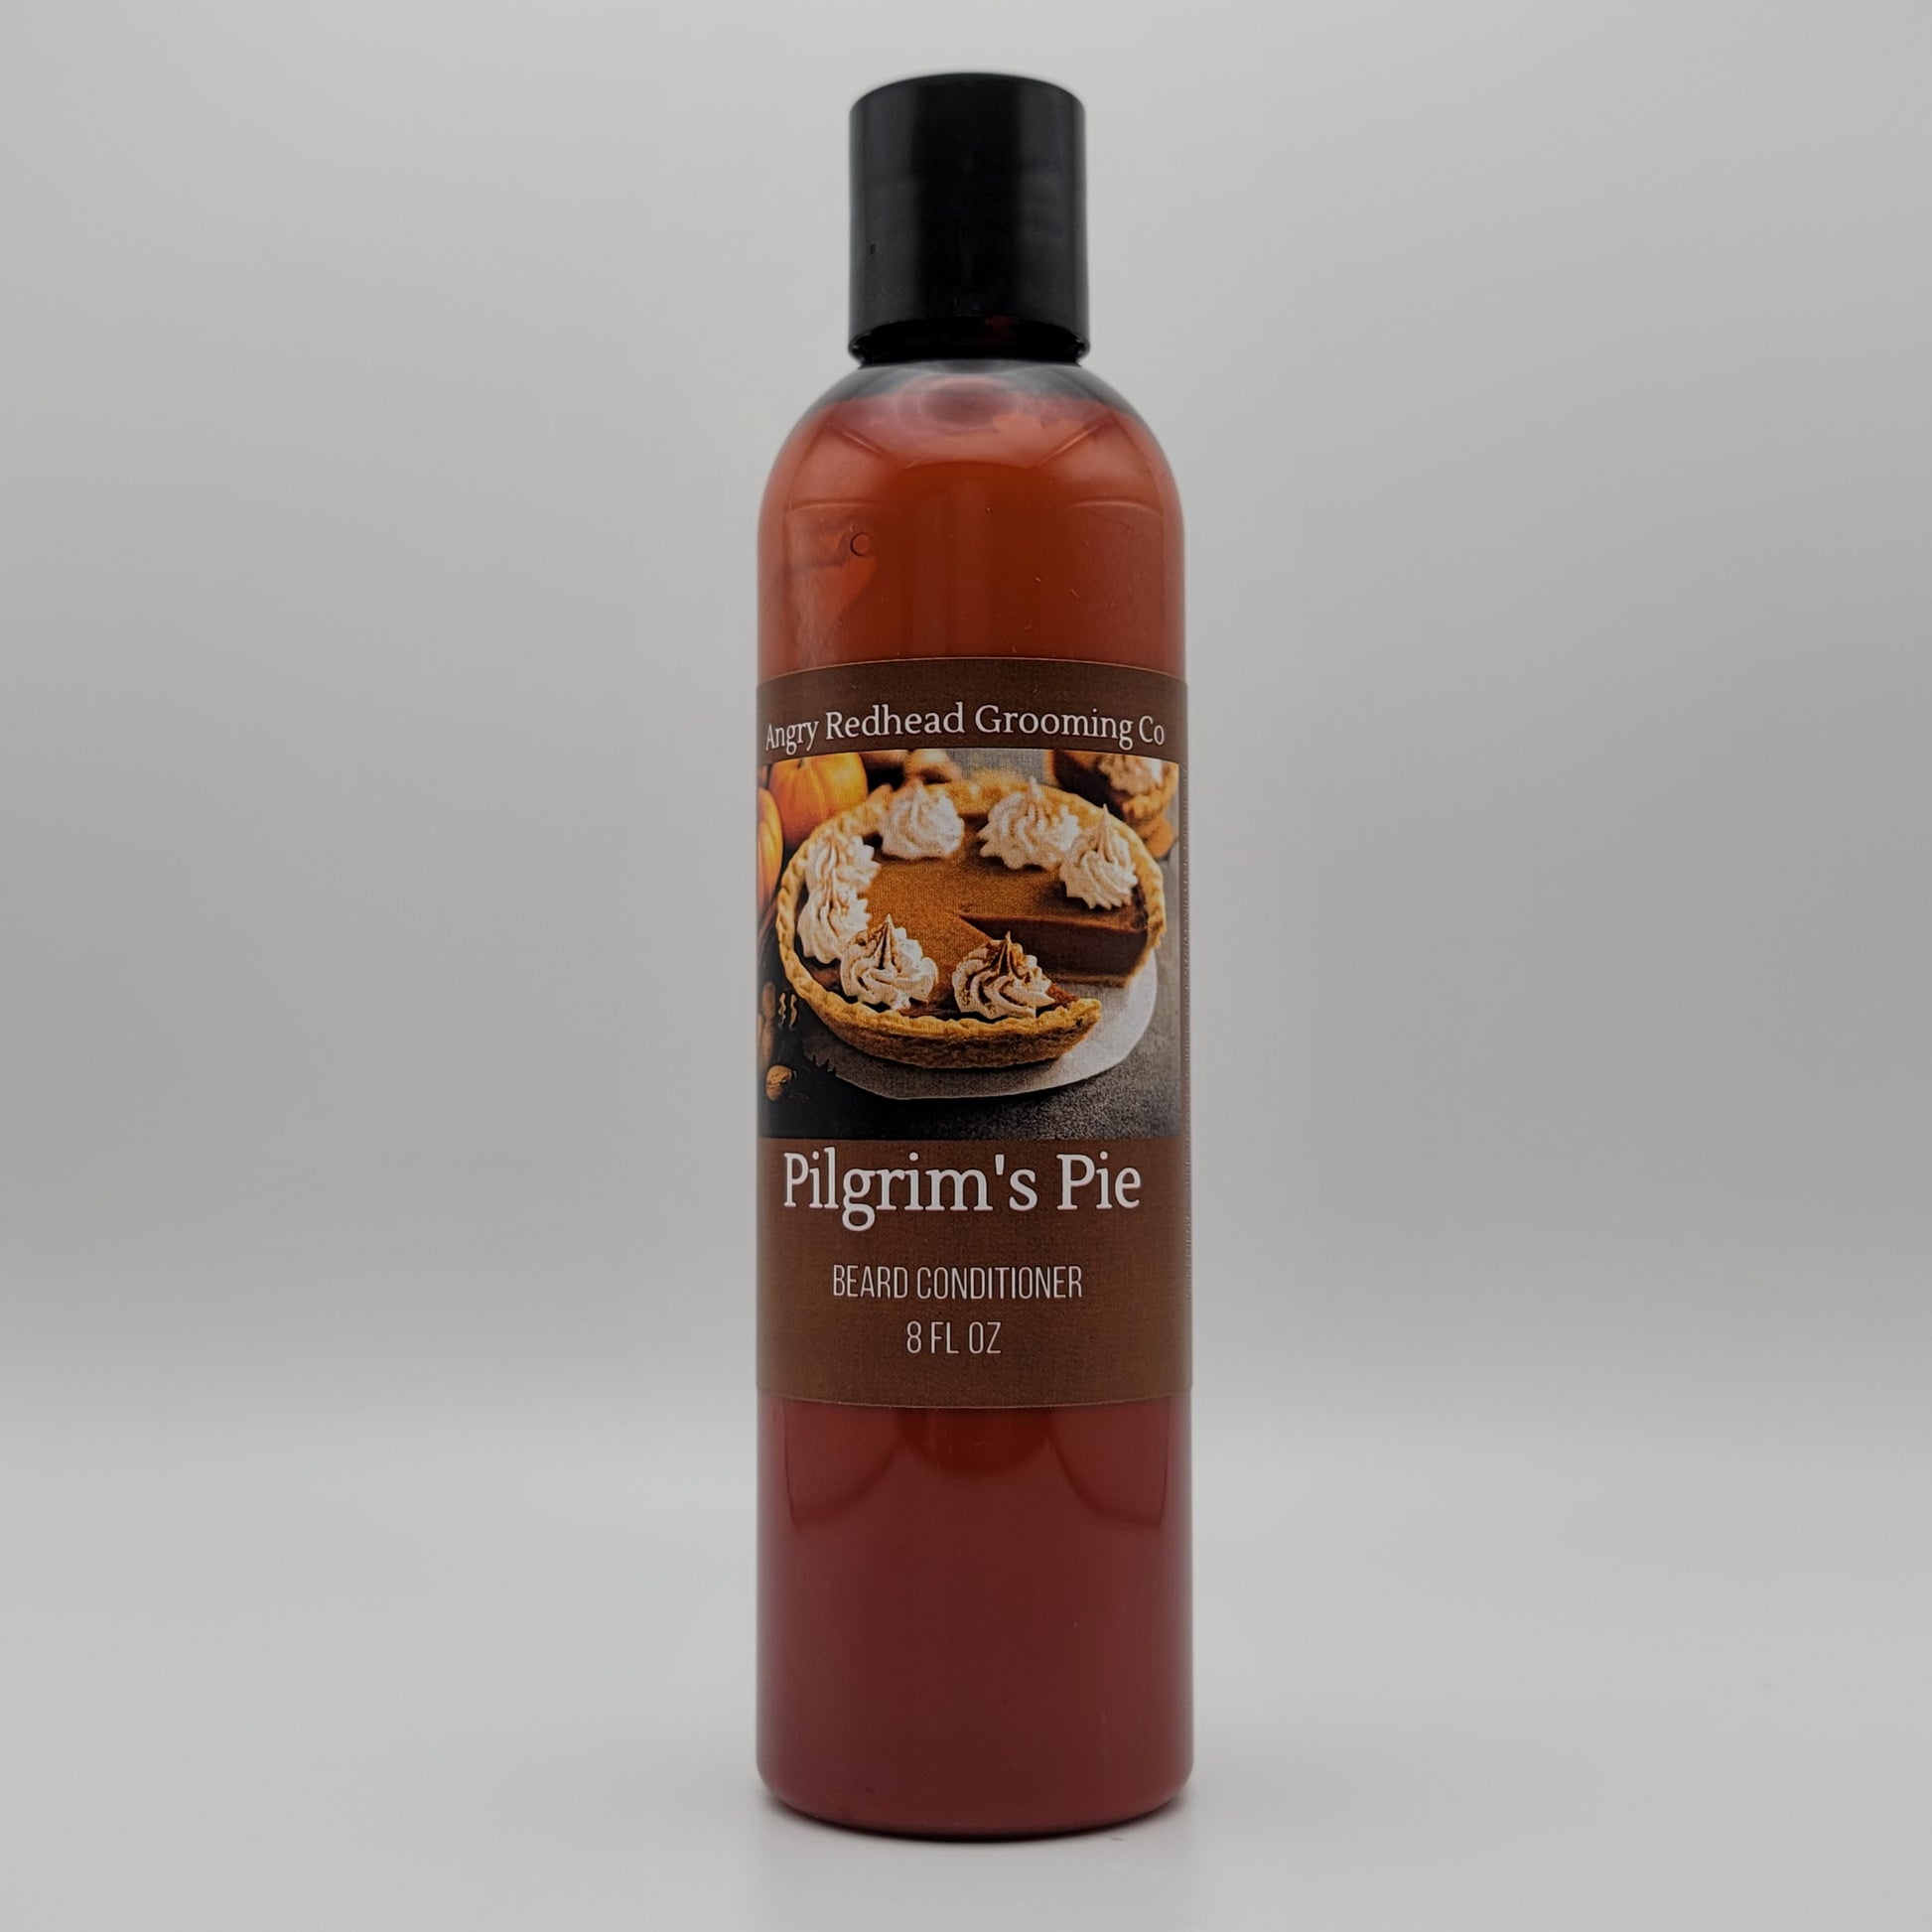 Pilgrim's Pie Beard Conditioner by Angry Redhead Grooming Co - angryredheadgrooming.com